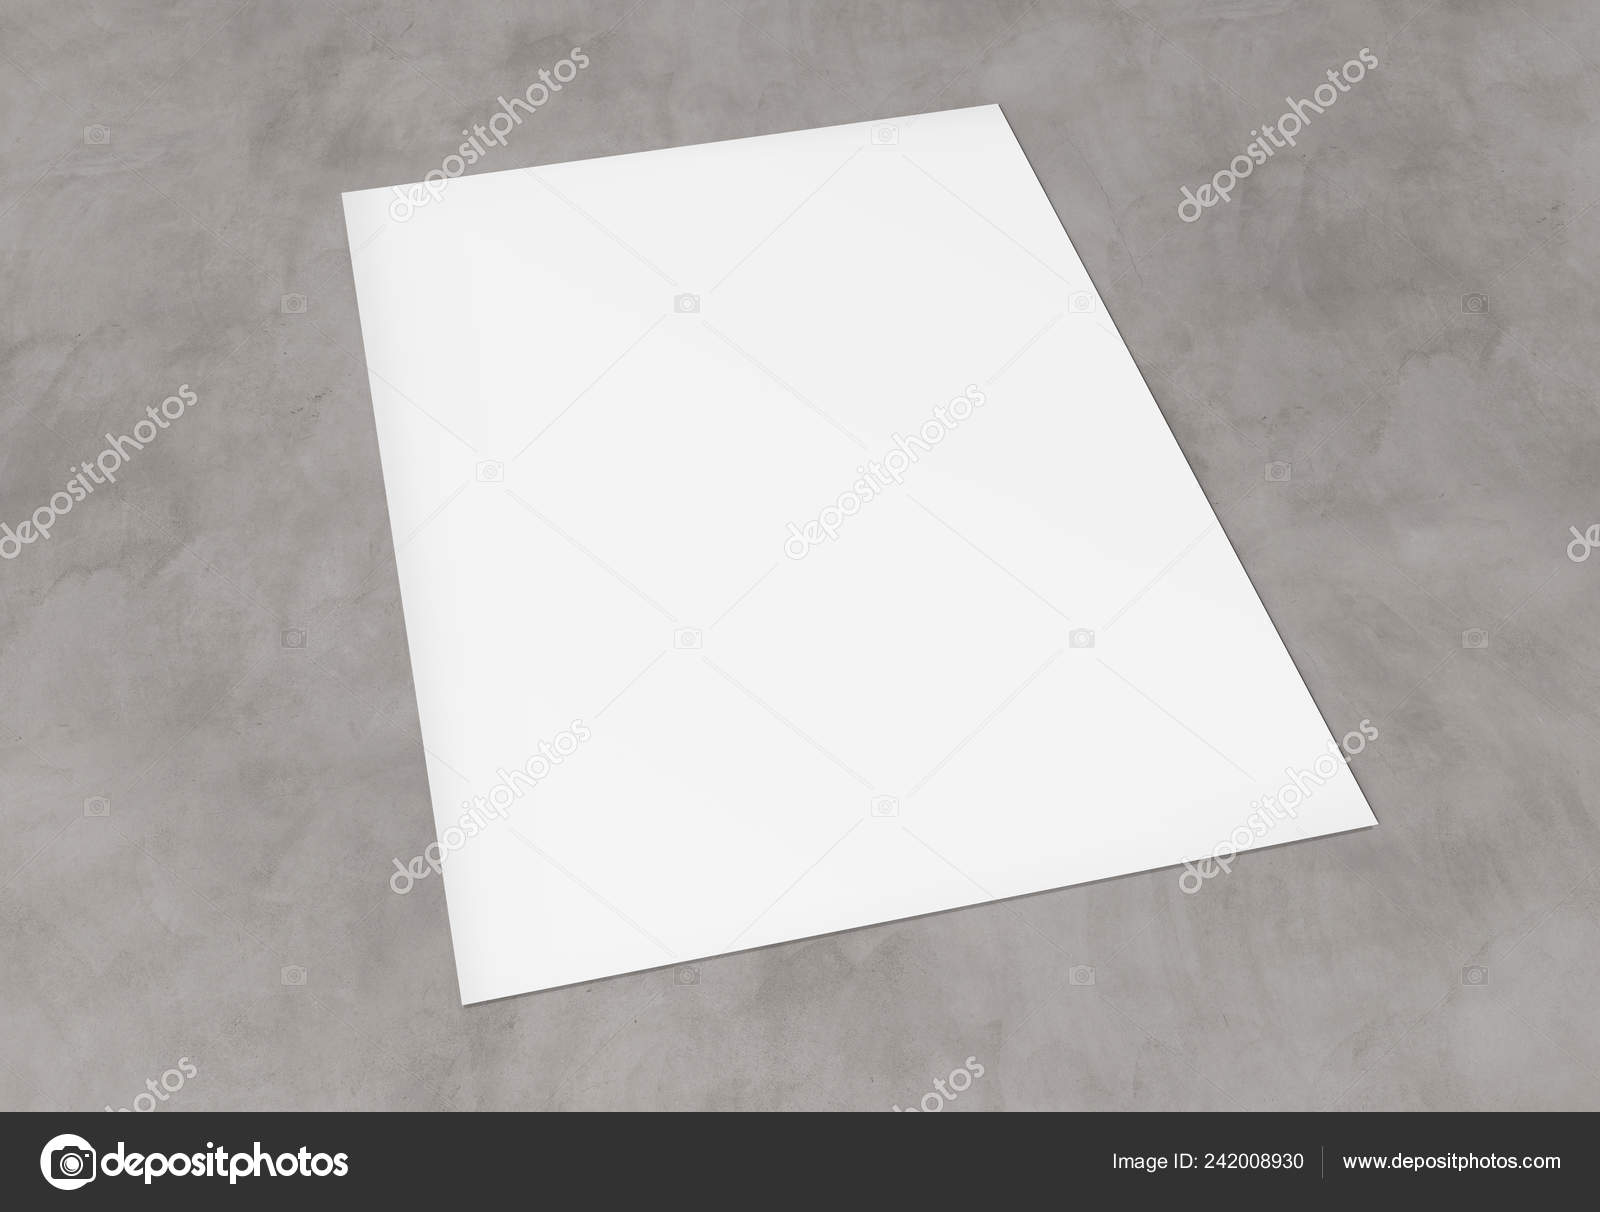 Download Blank Paper Sheet Mockup Concrete Background Rendering Stock Photo C Sdecoret 242008930 Yellowimages Mockups